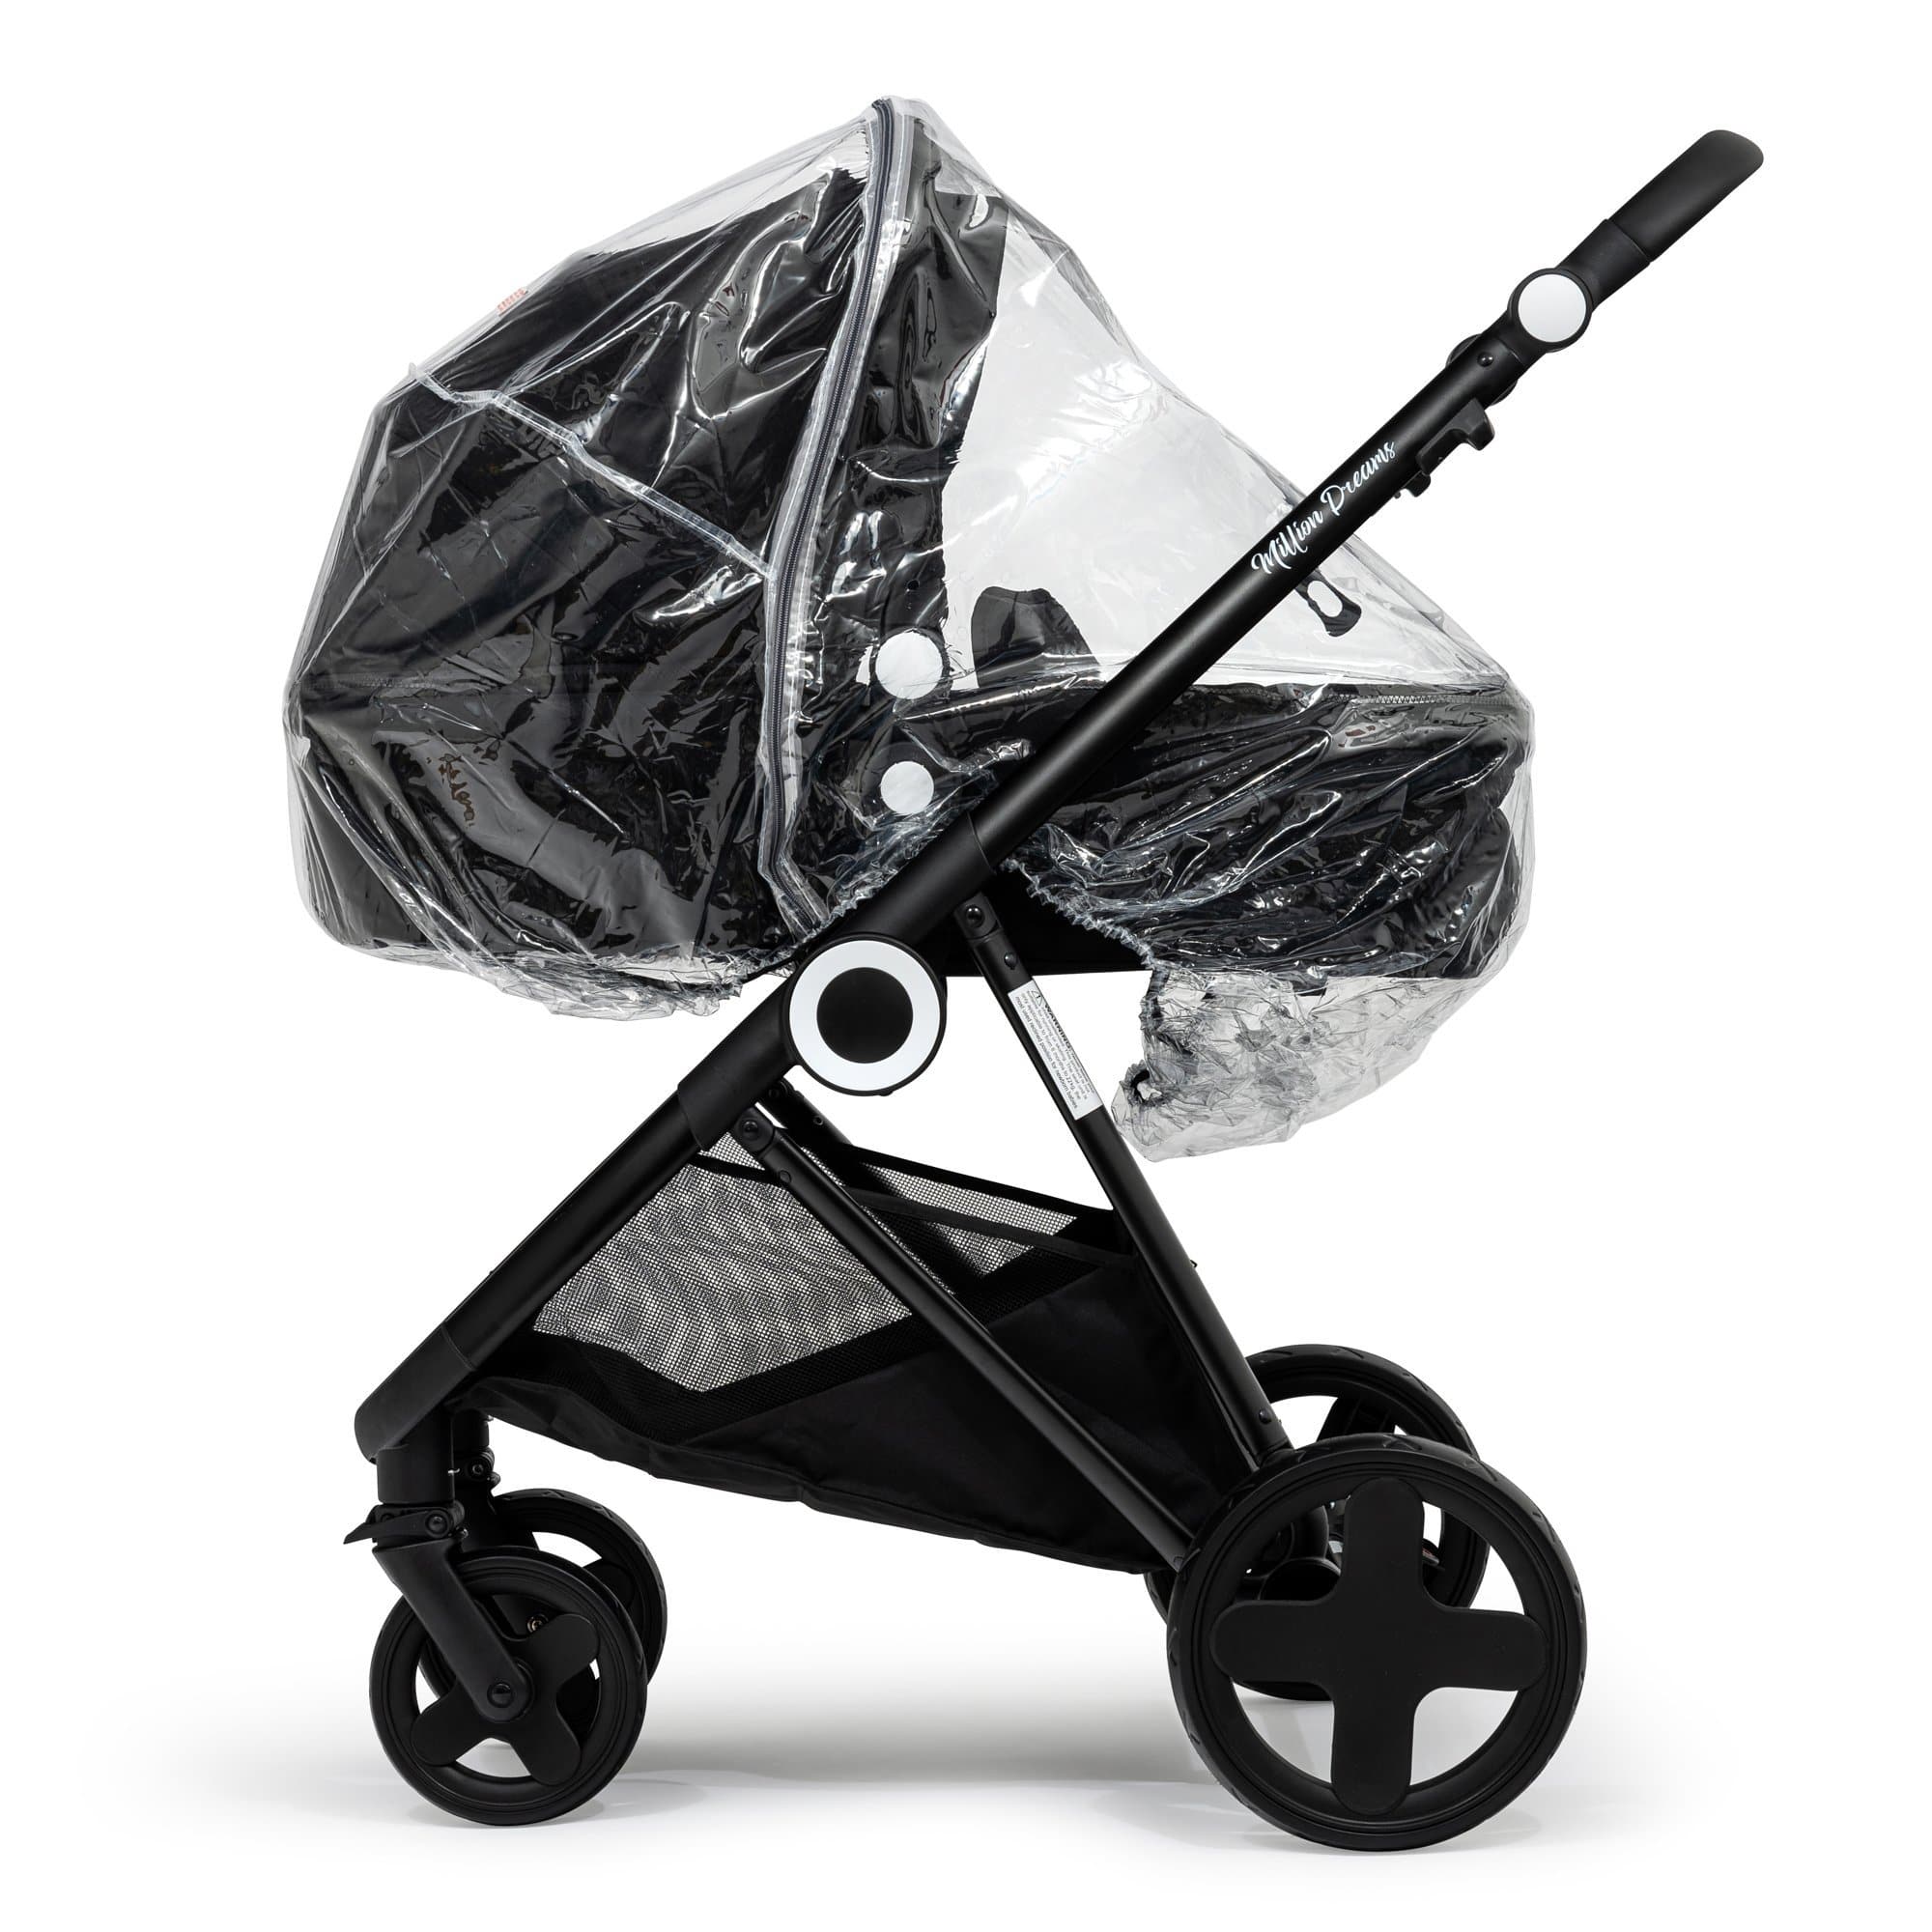 2 in 1 Rain Cover Compatible with Valco - Fits All Models - For Your Little One